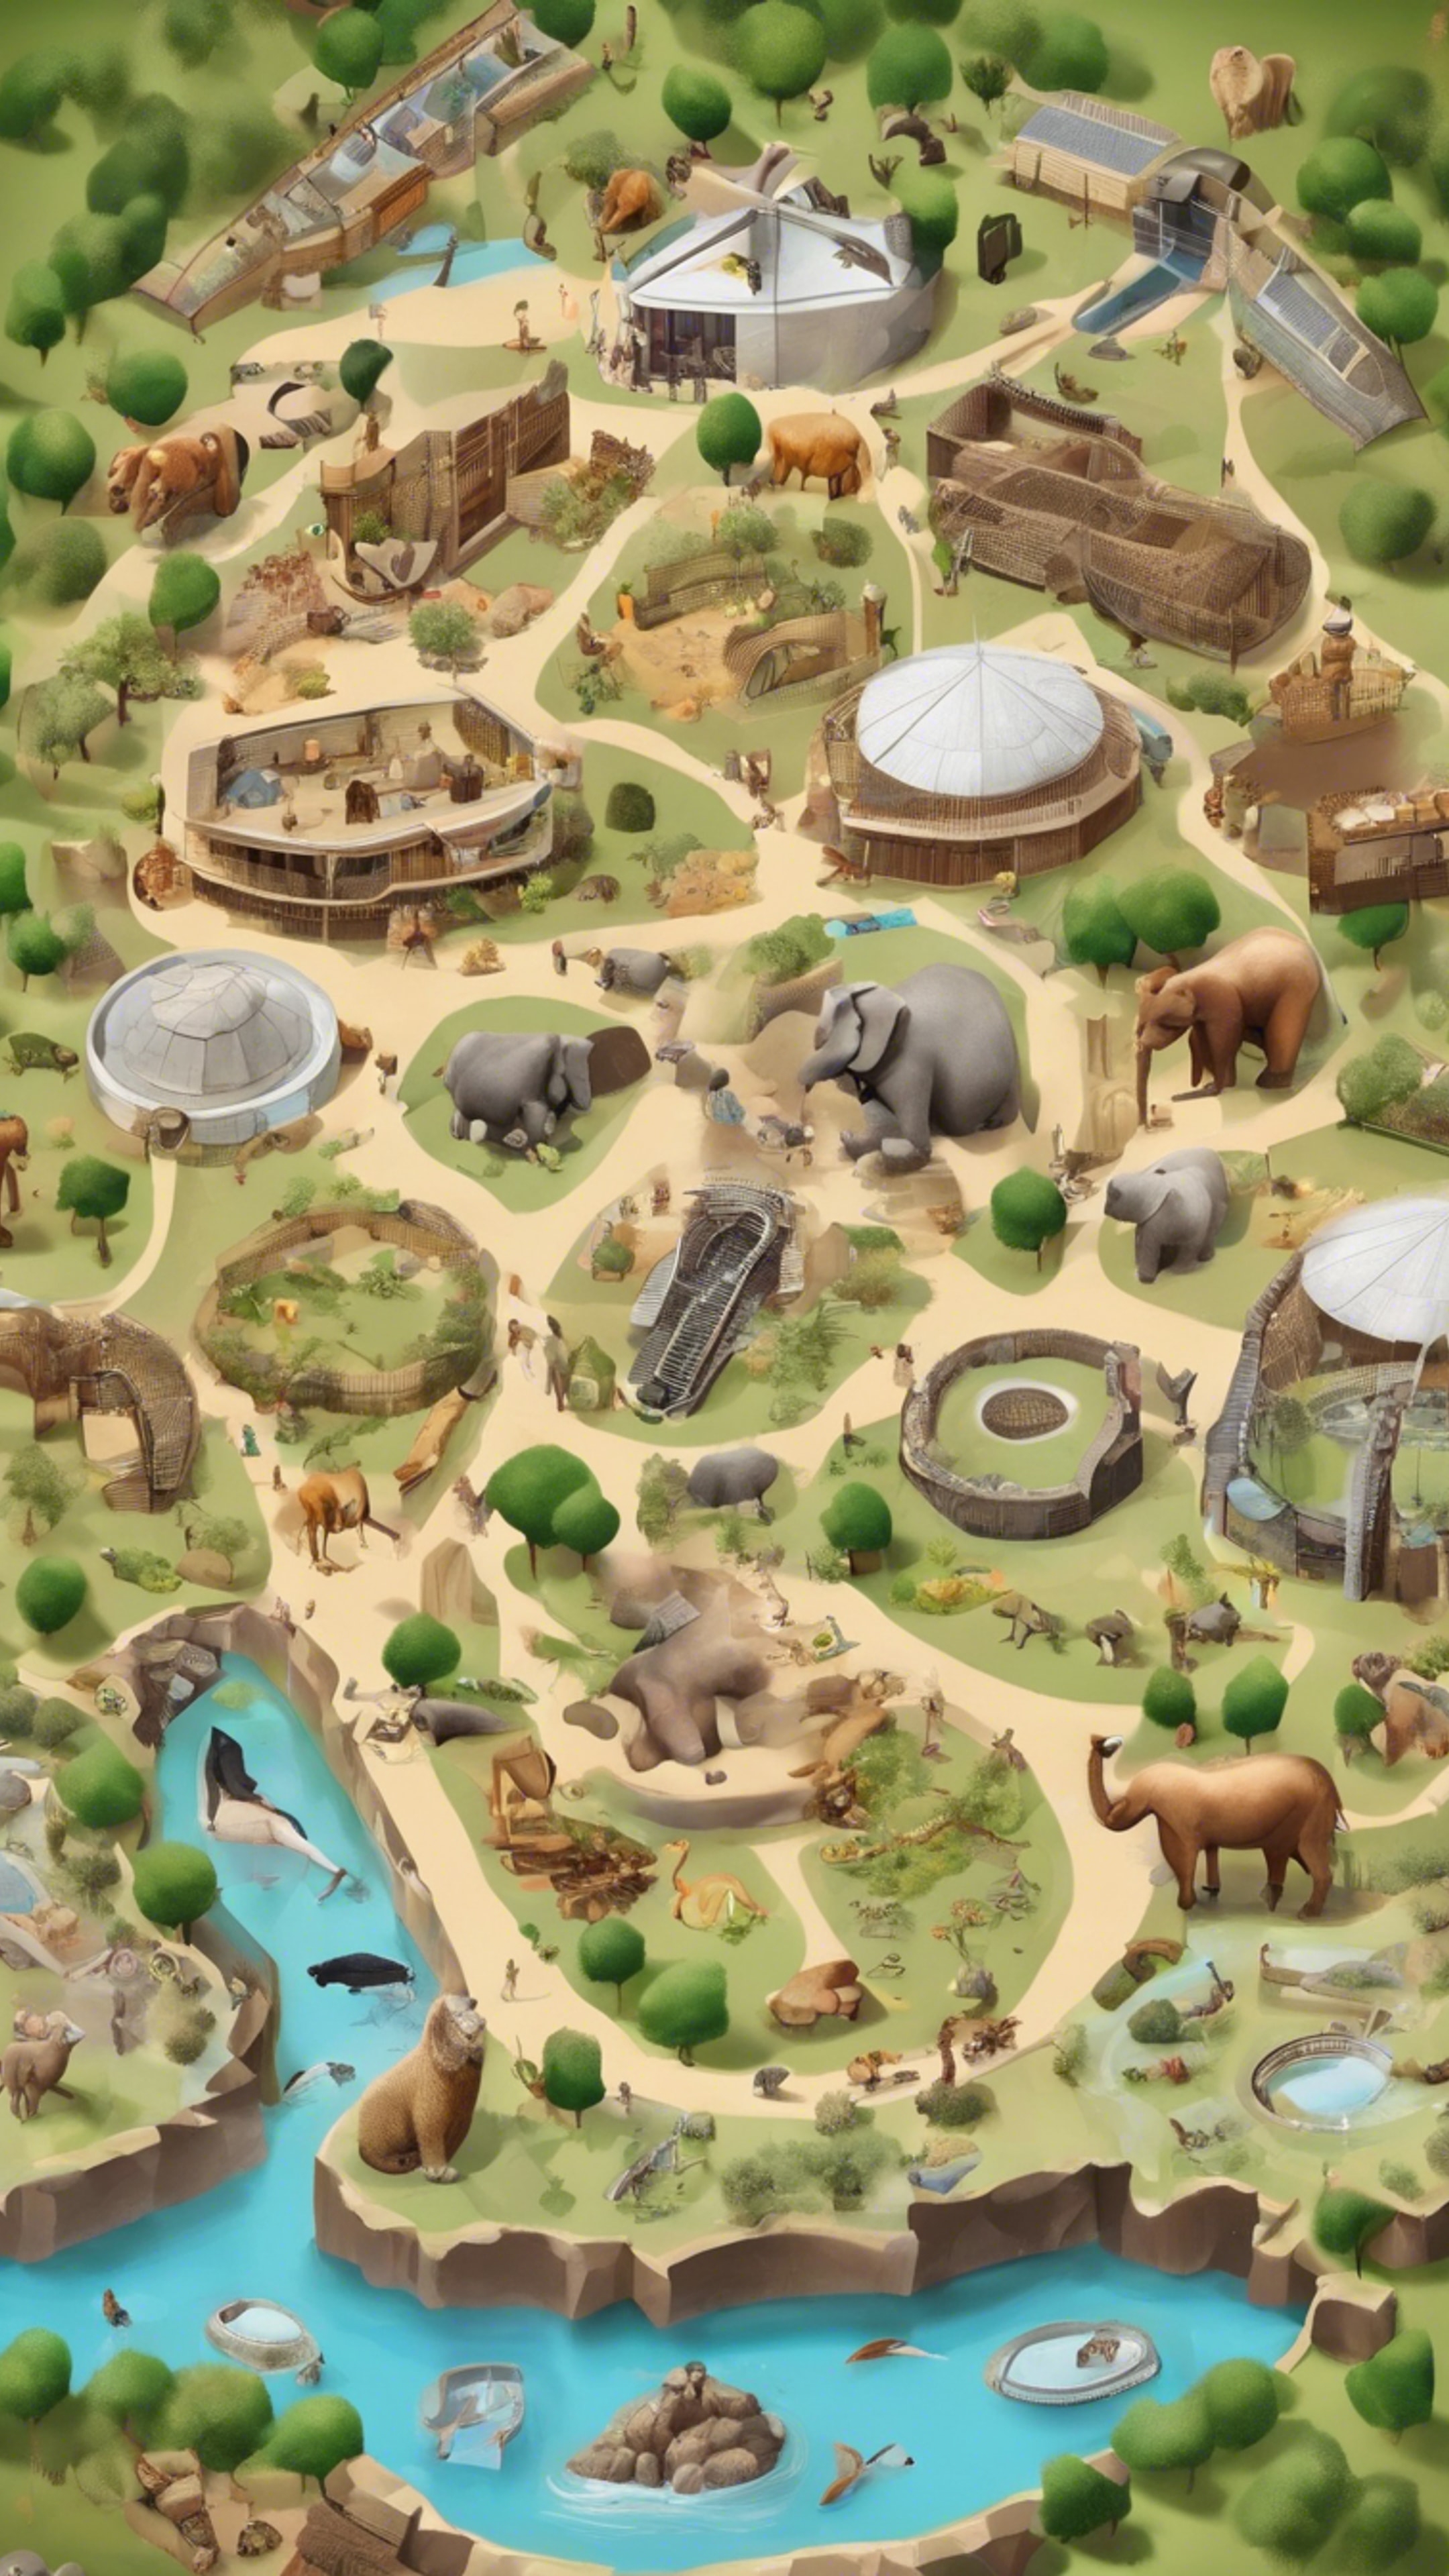 A graphic map of a zoo, with different animal enclosures, food stalls and amenities.壁紙[7d3ed7eed3f244f7a17f]